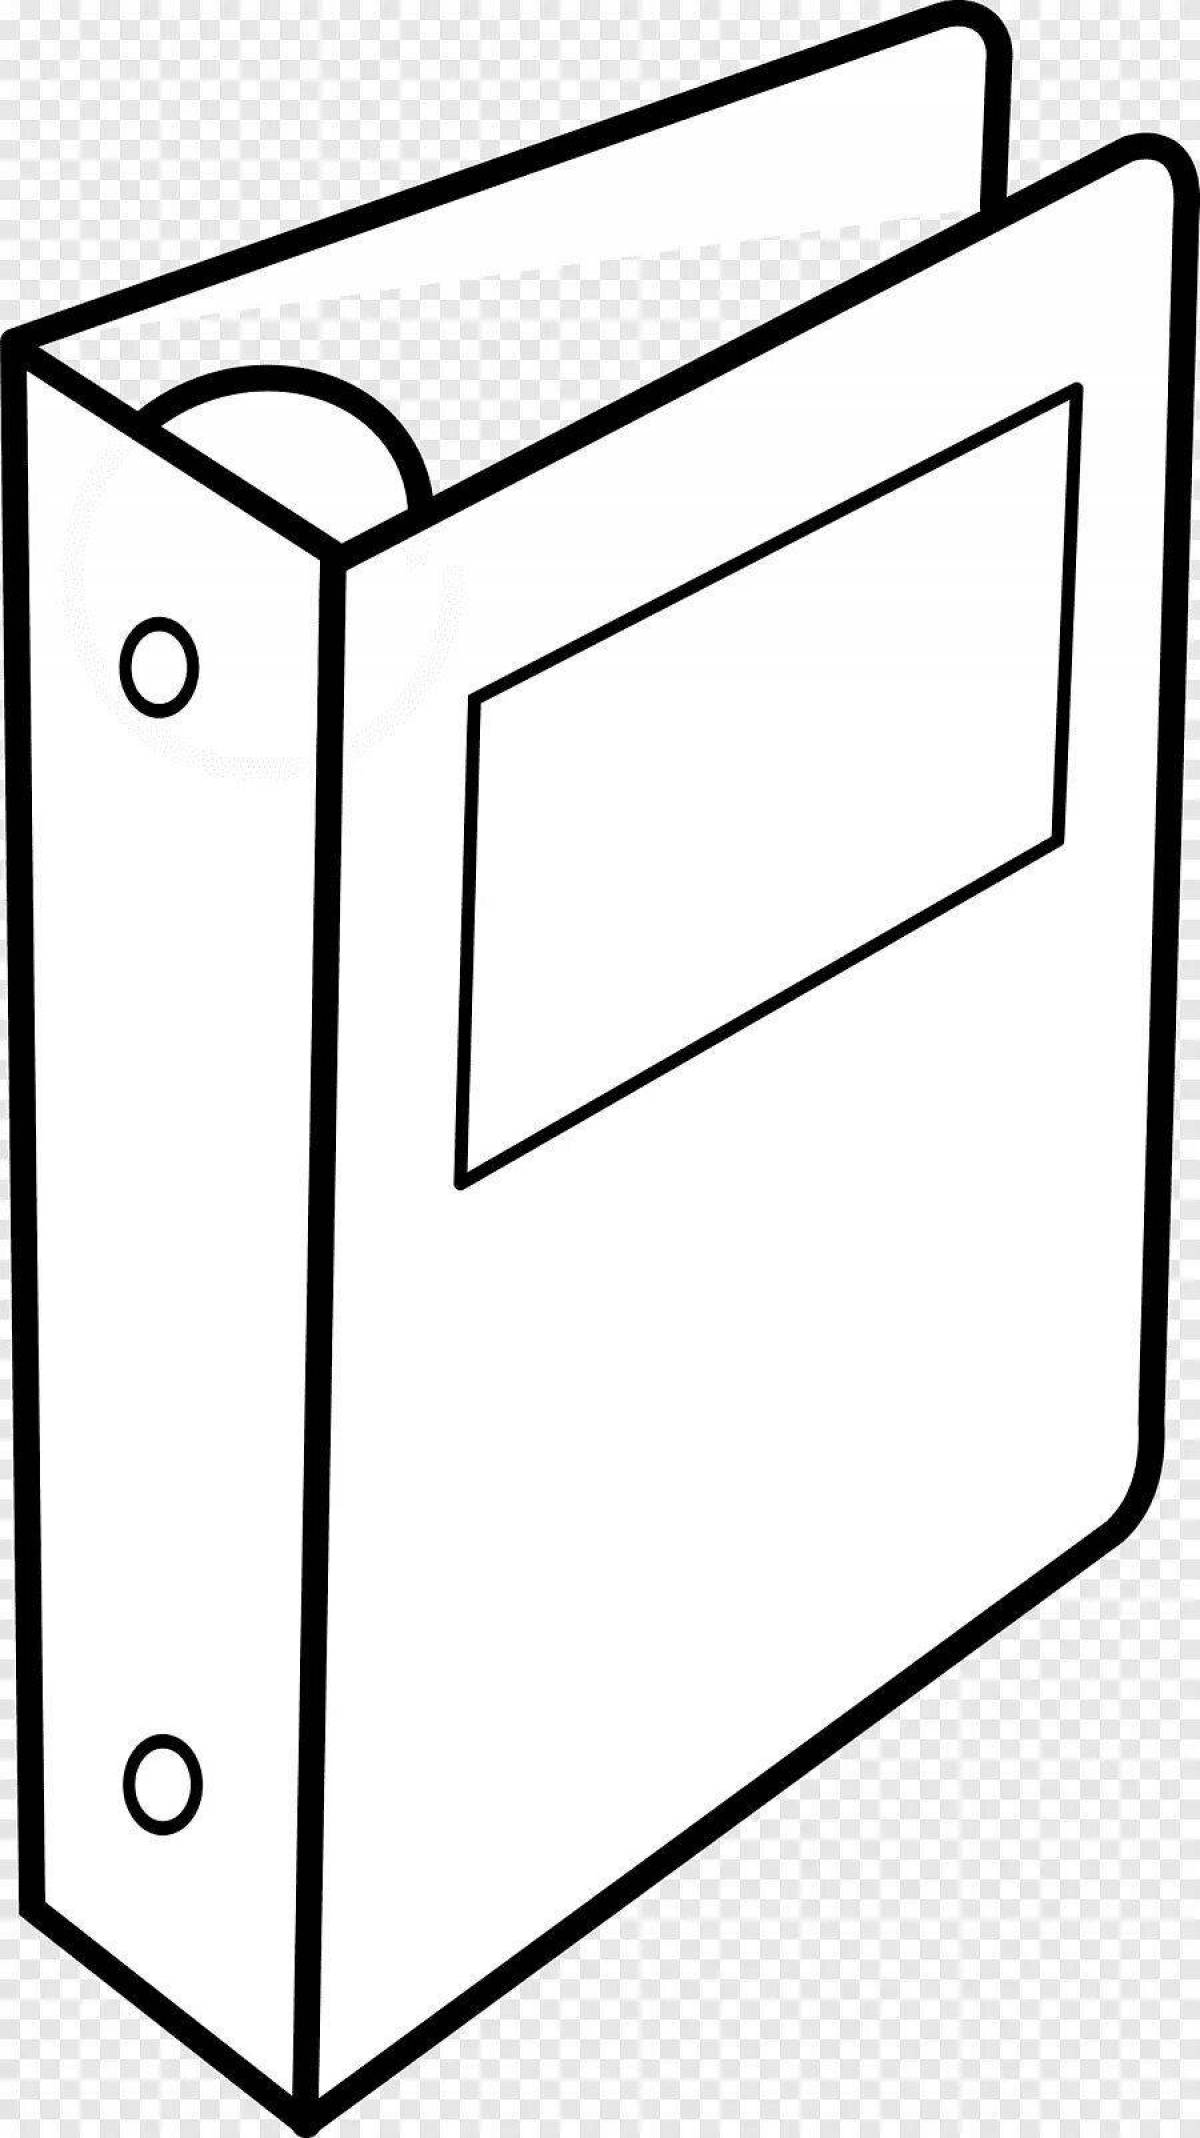 Folder with rich coloring pages